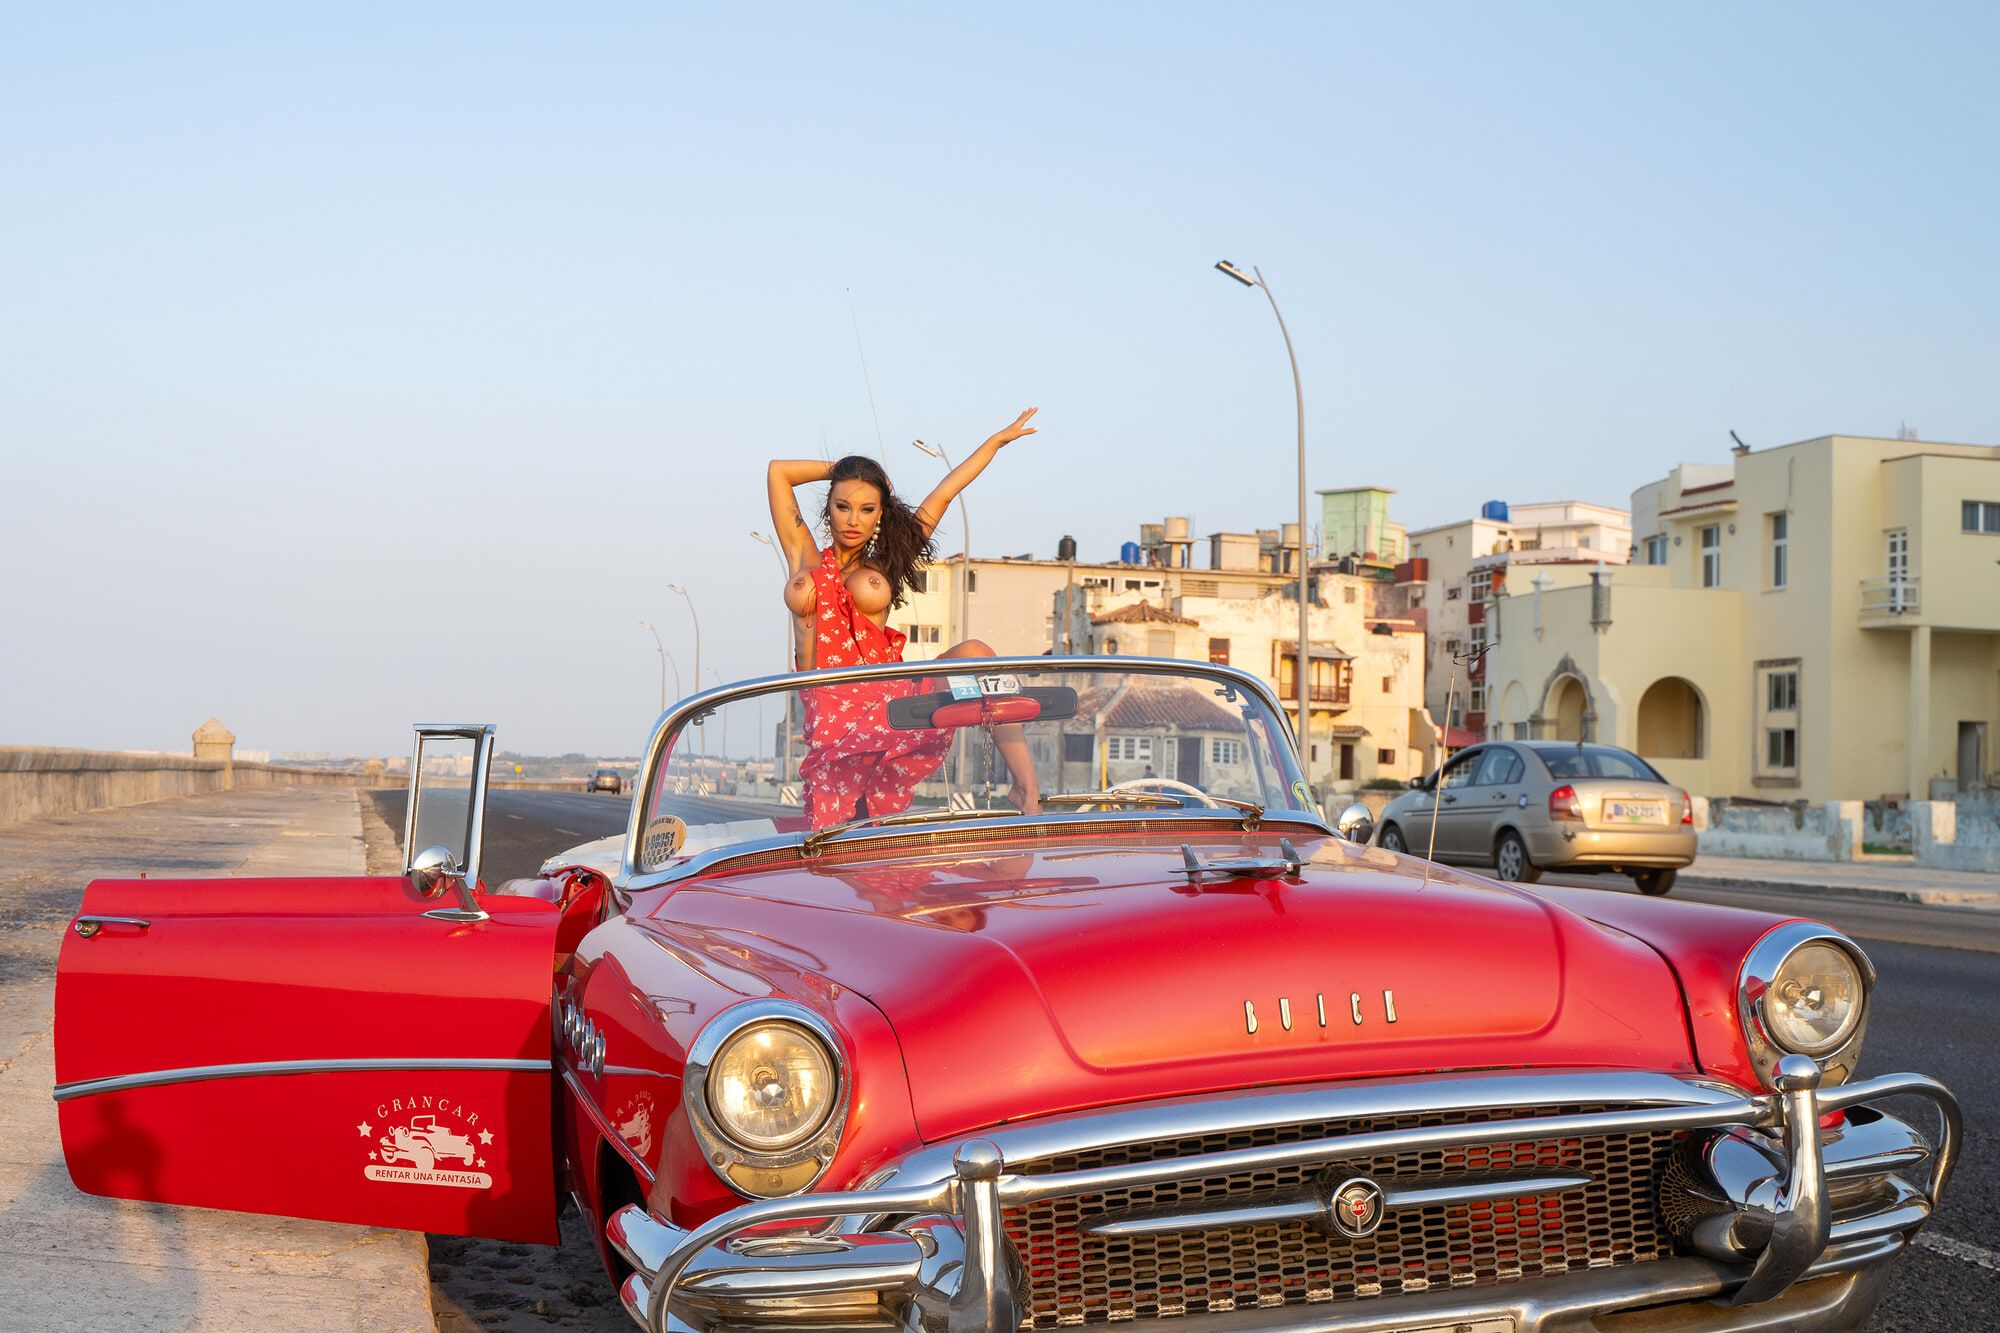 Monika Fox In Red Dress On Waterfront In Rare Car #2